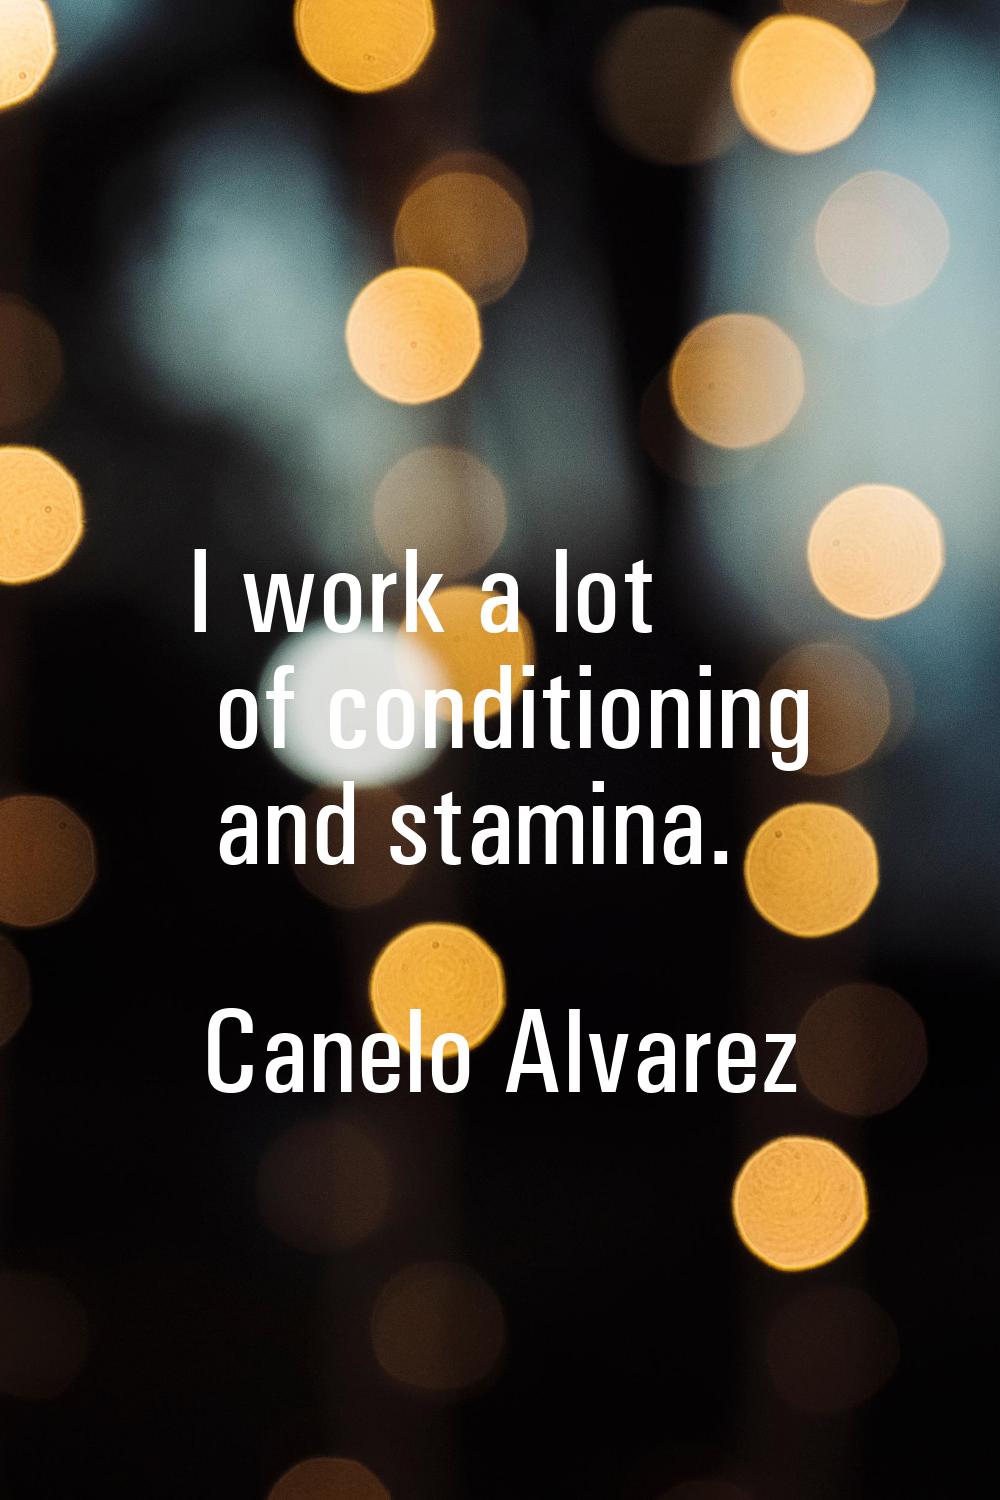 I work a lot of conditioning and stamina.